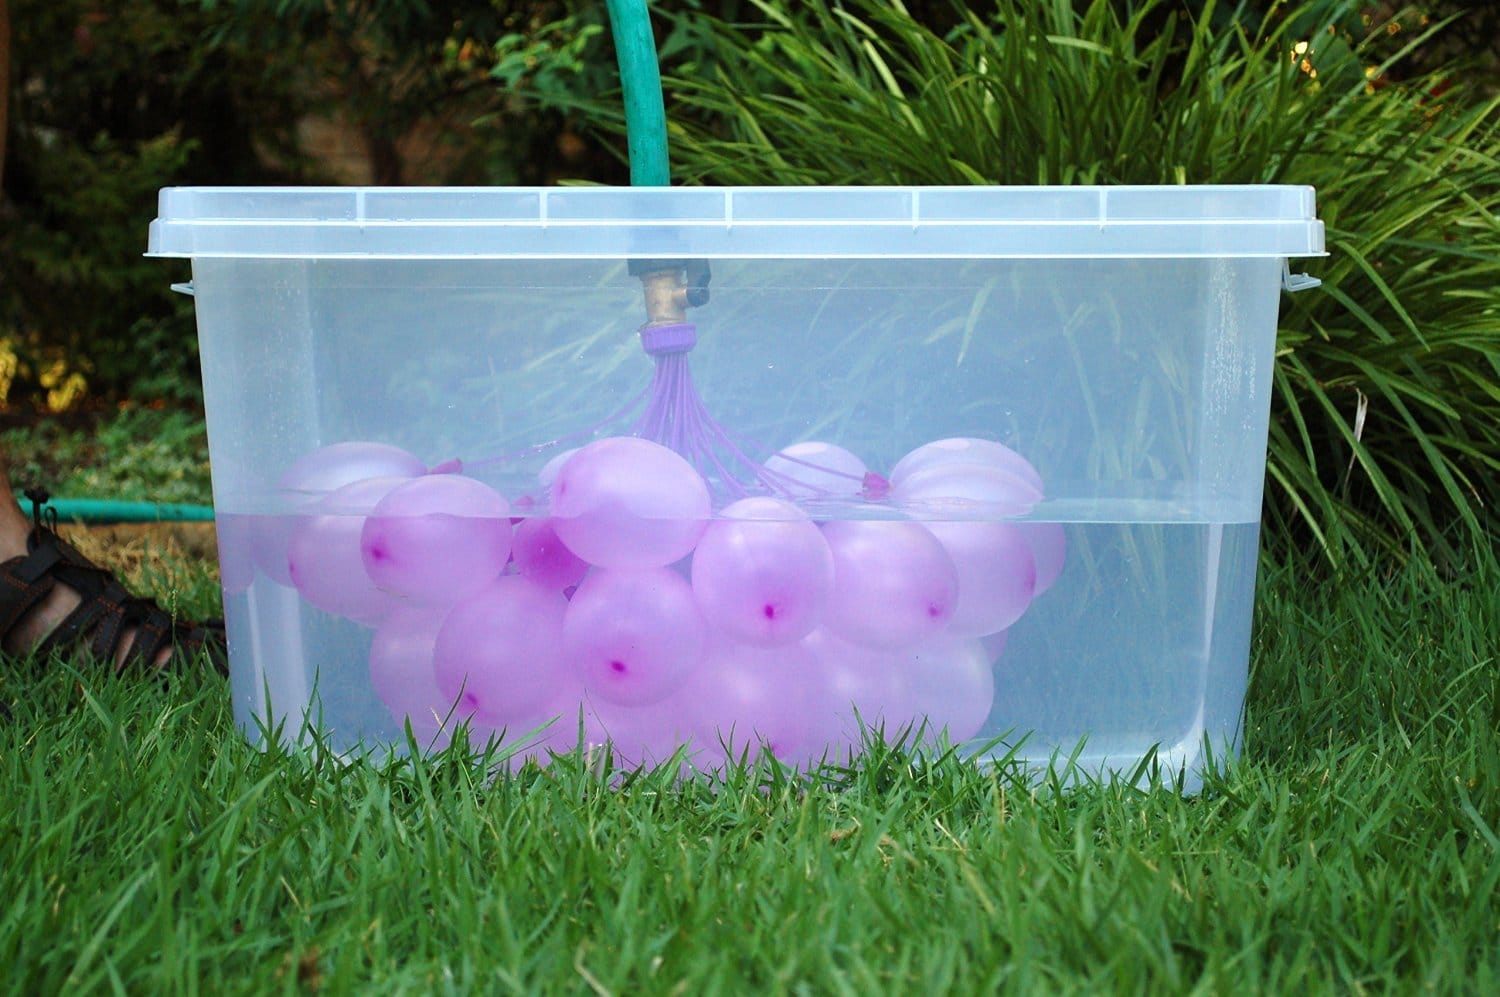 Plastic container full of water and water balloons on a green grass
